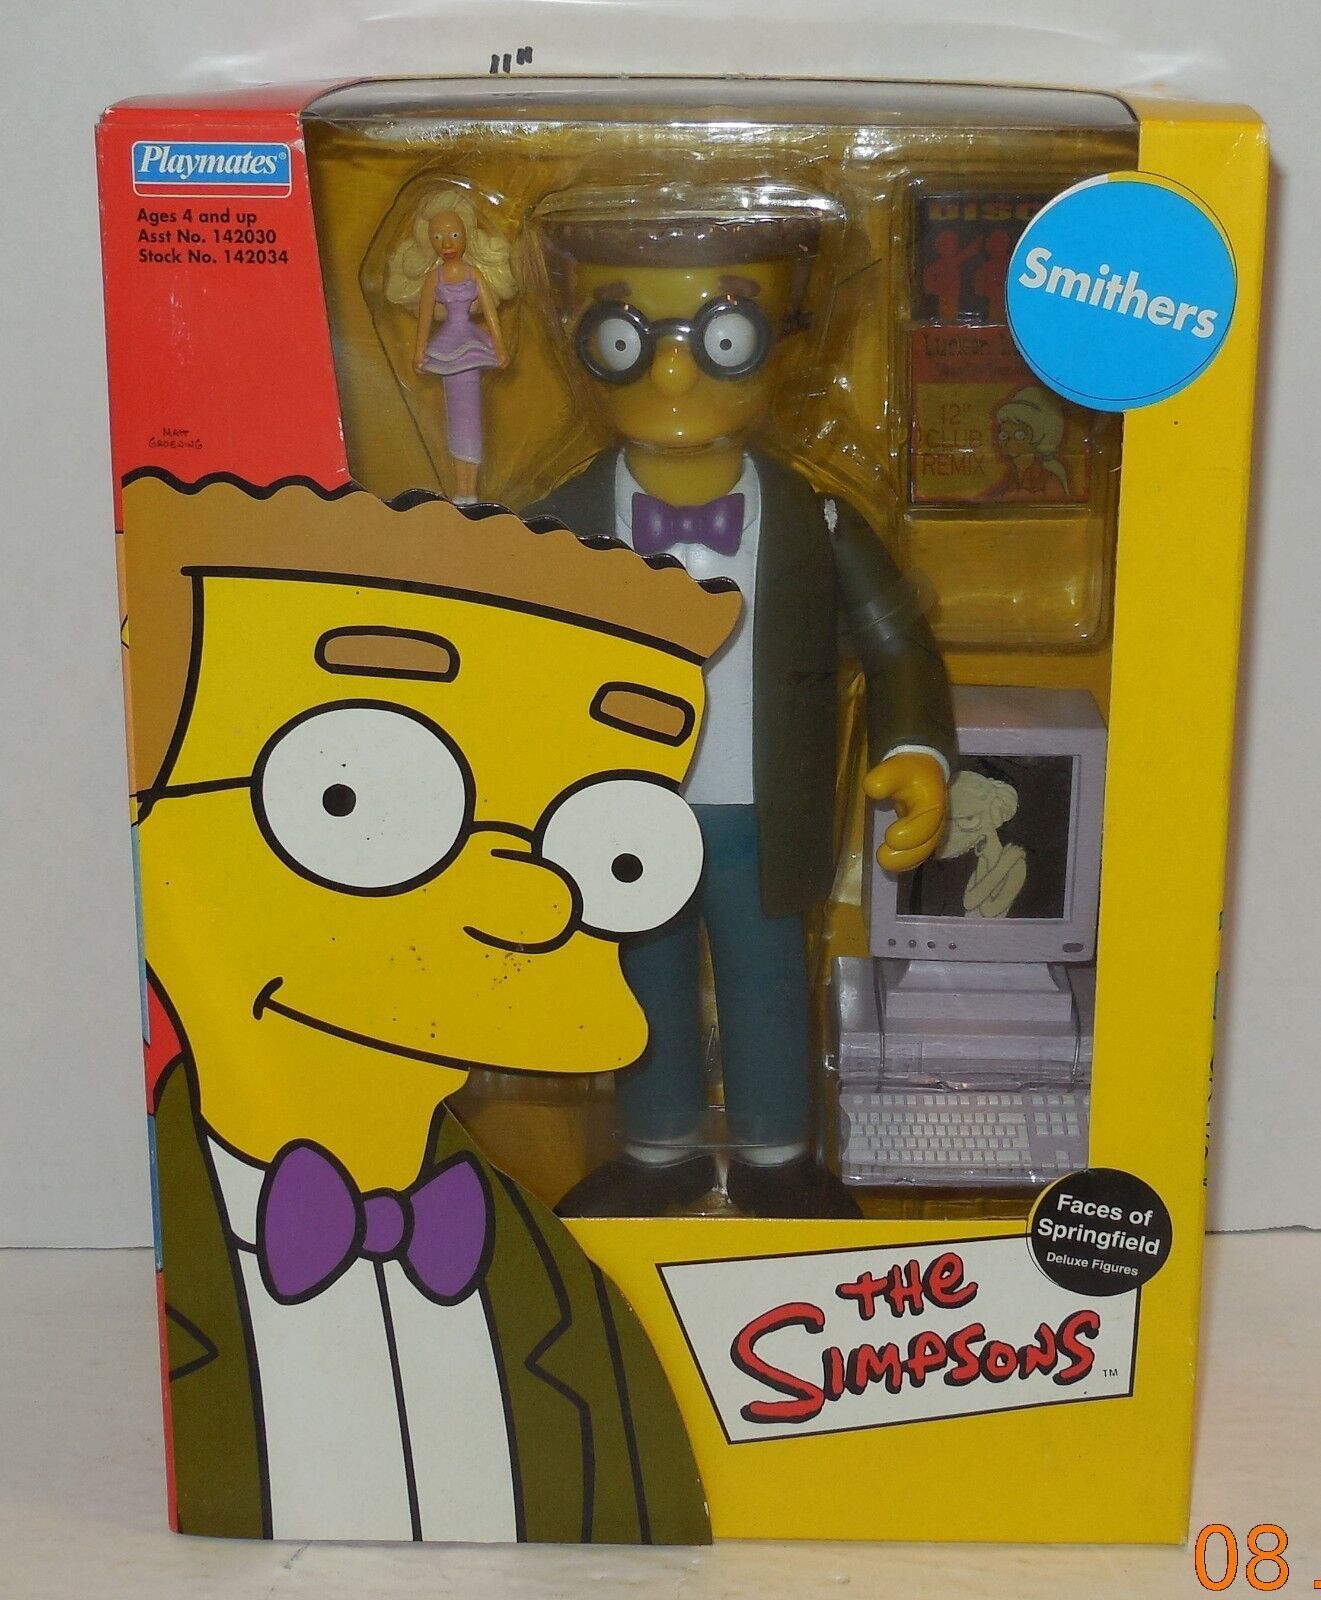 Playmates The Simpsons WOS Faces Of Springfield Smithers 9" Figure NIP Rare HTF - $72.42